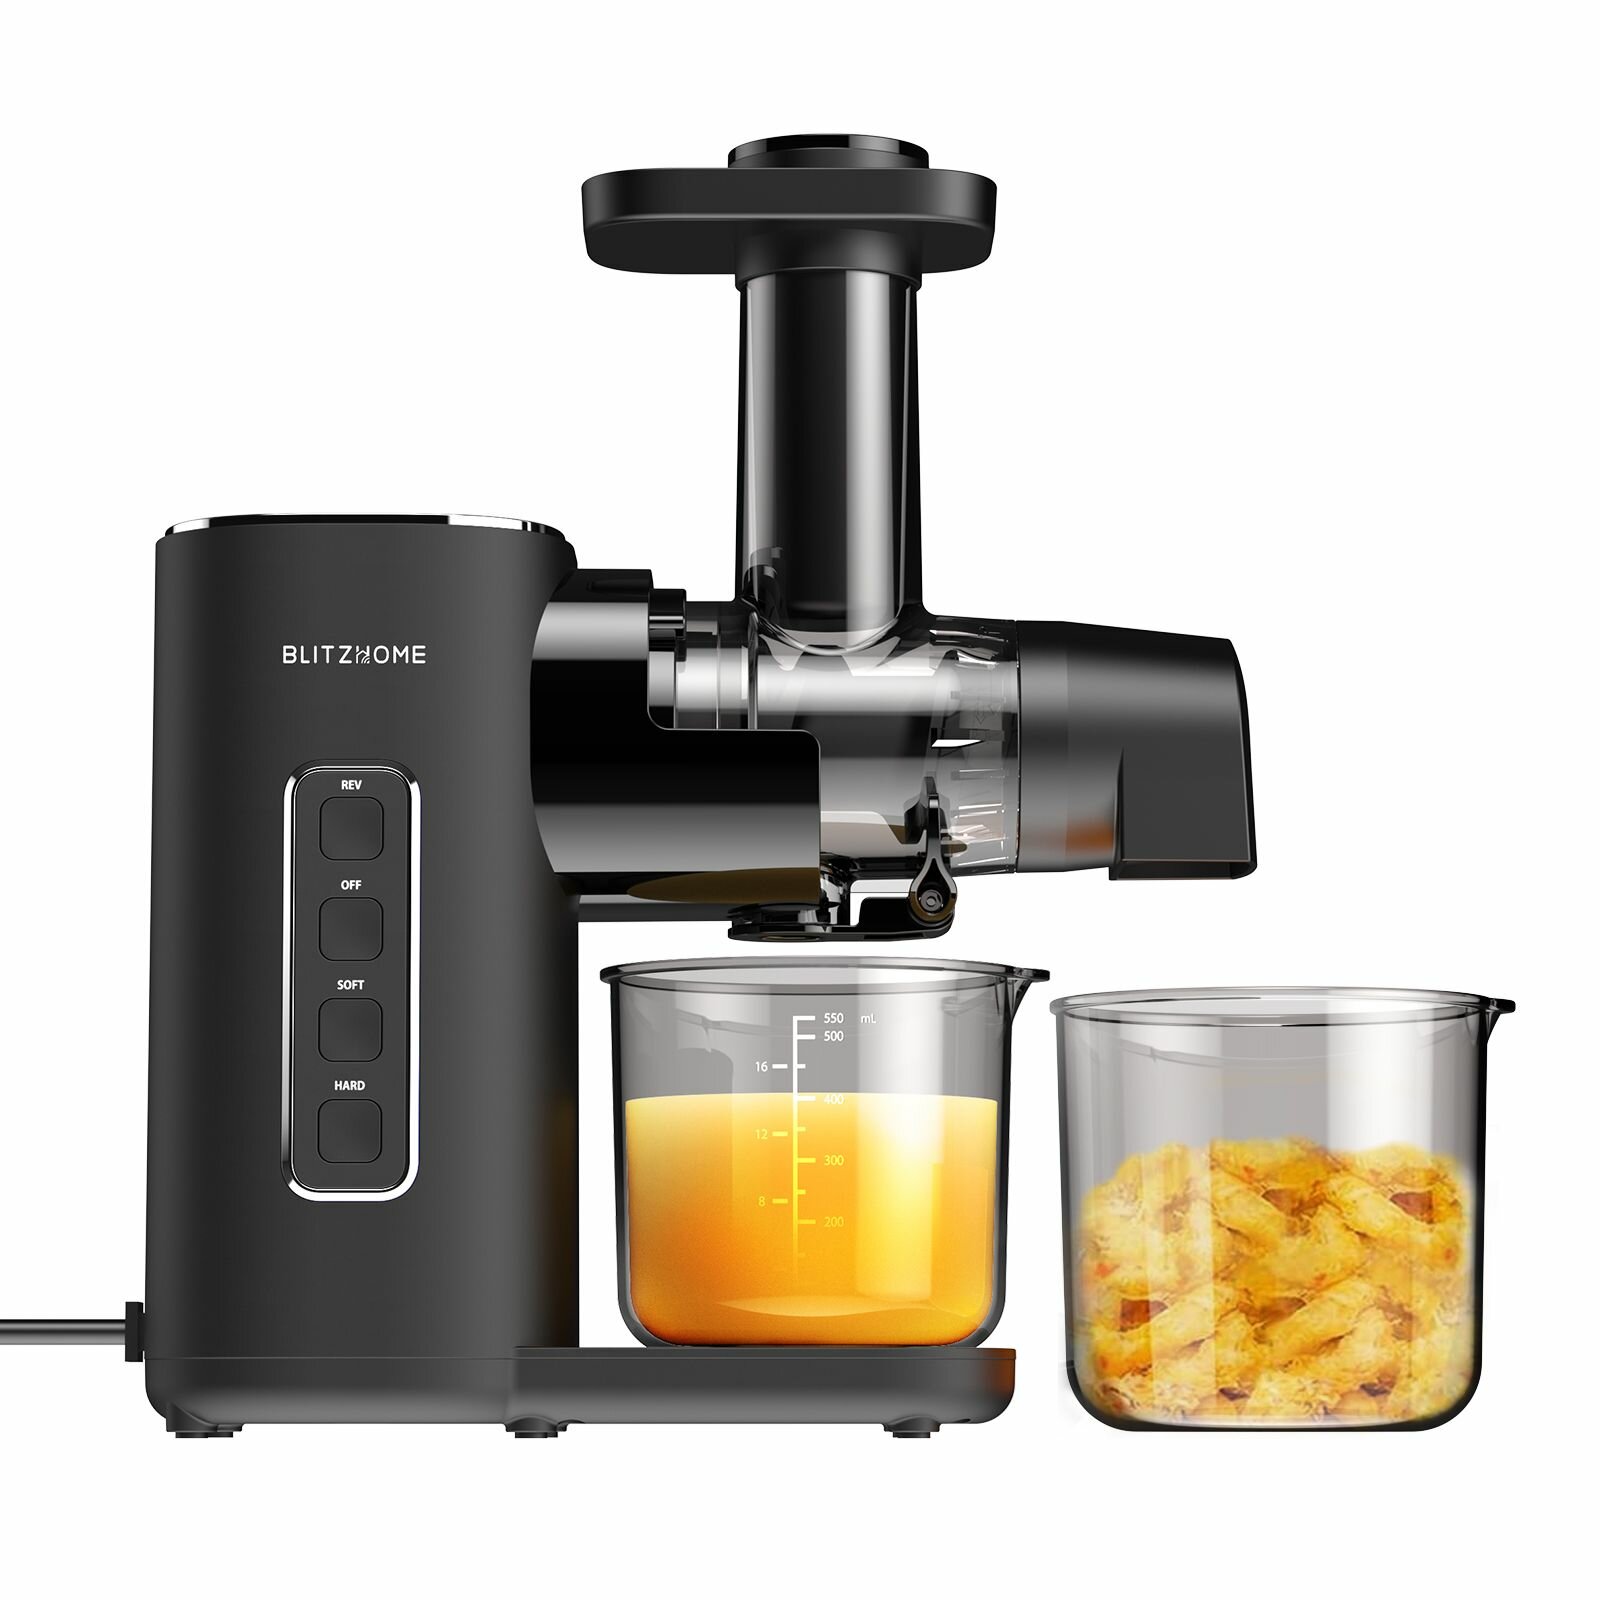 Blitzhome BH-JC01 Cold Press Juicer Machines 2-Speed Modes Slow Masticating Juicer for Vegetable and Fruit with Quiet Motor/Reverse Function/Wide 1.73" Feed Port Easy to Clean